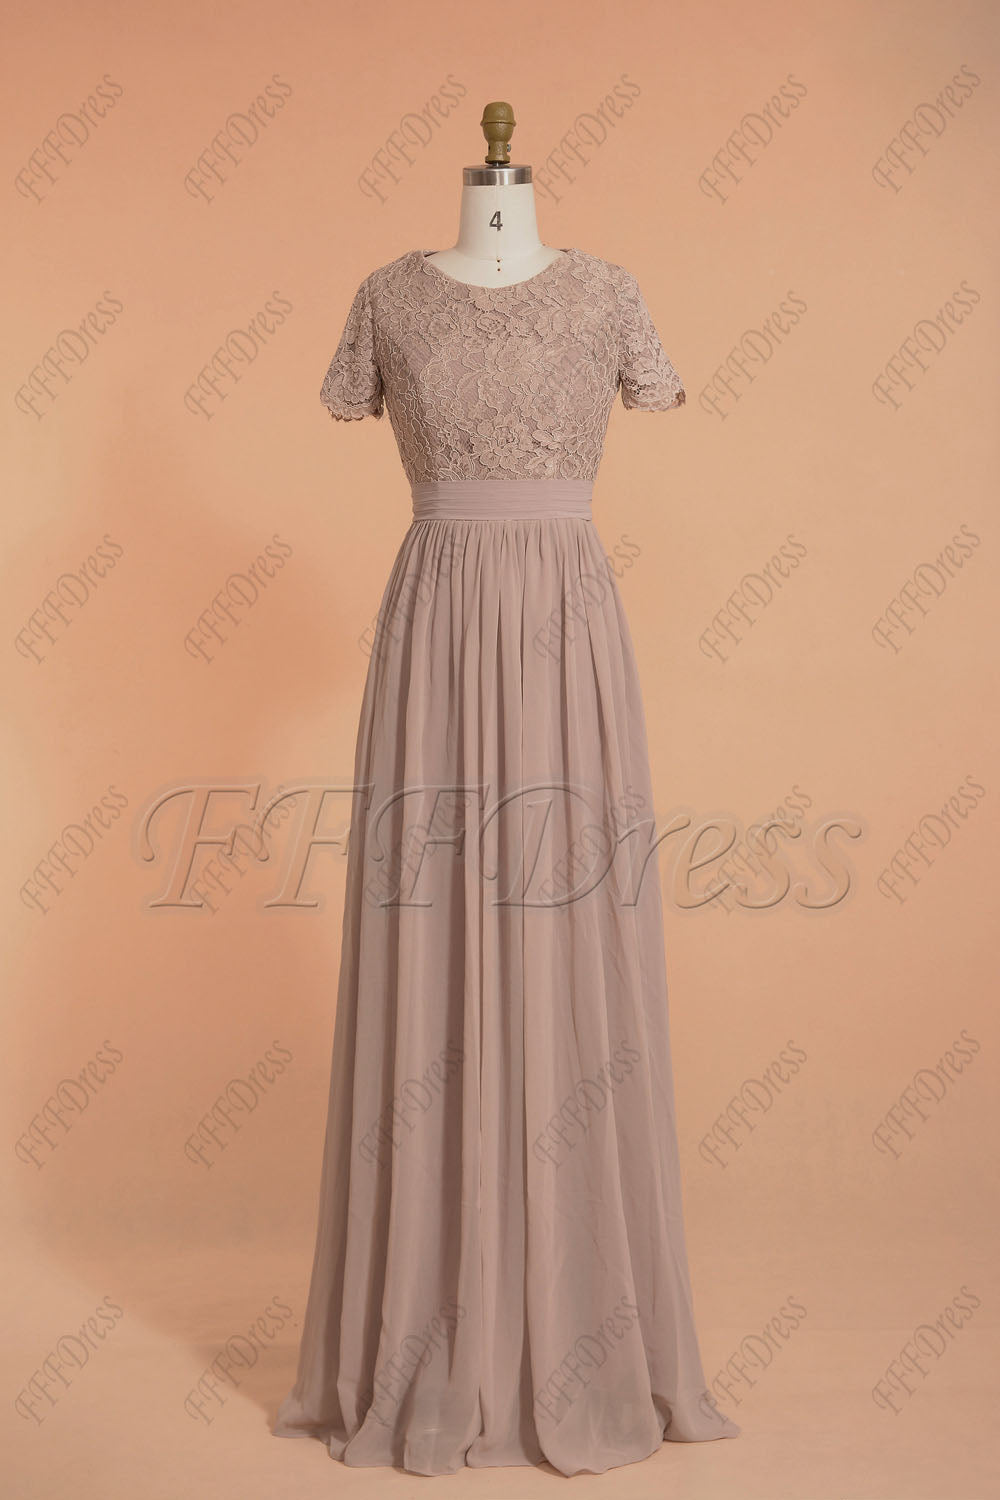 Modest rose mauve bridesmaid dresses with short sleeves